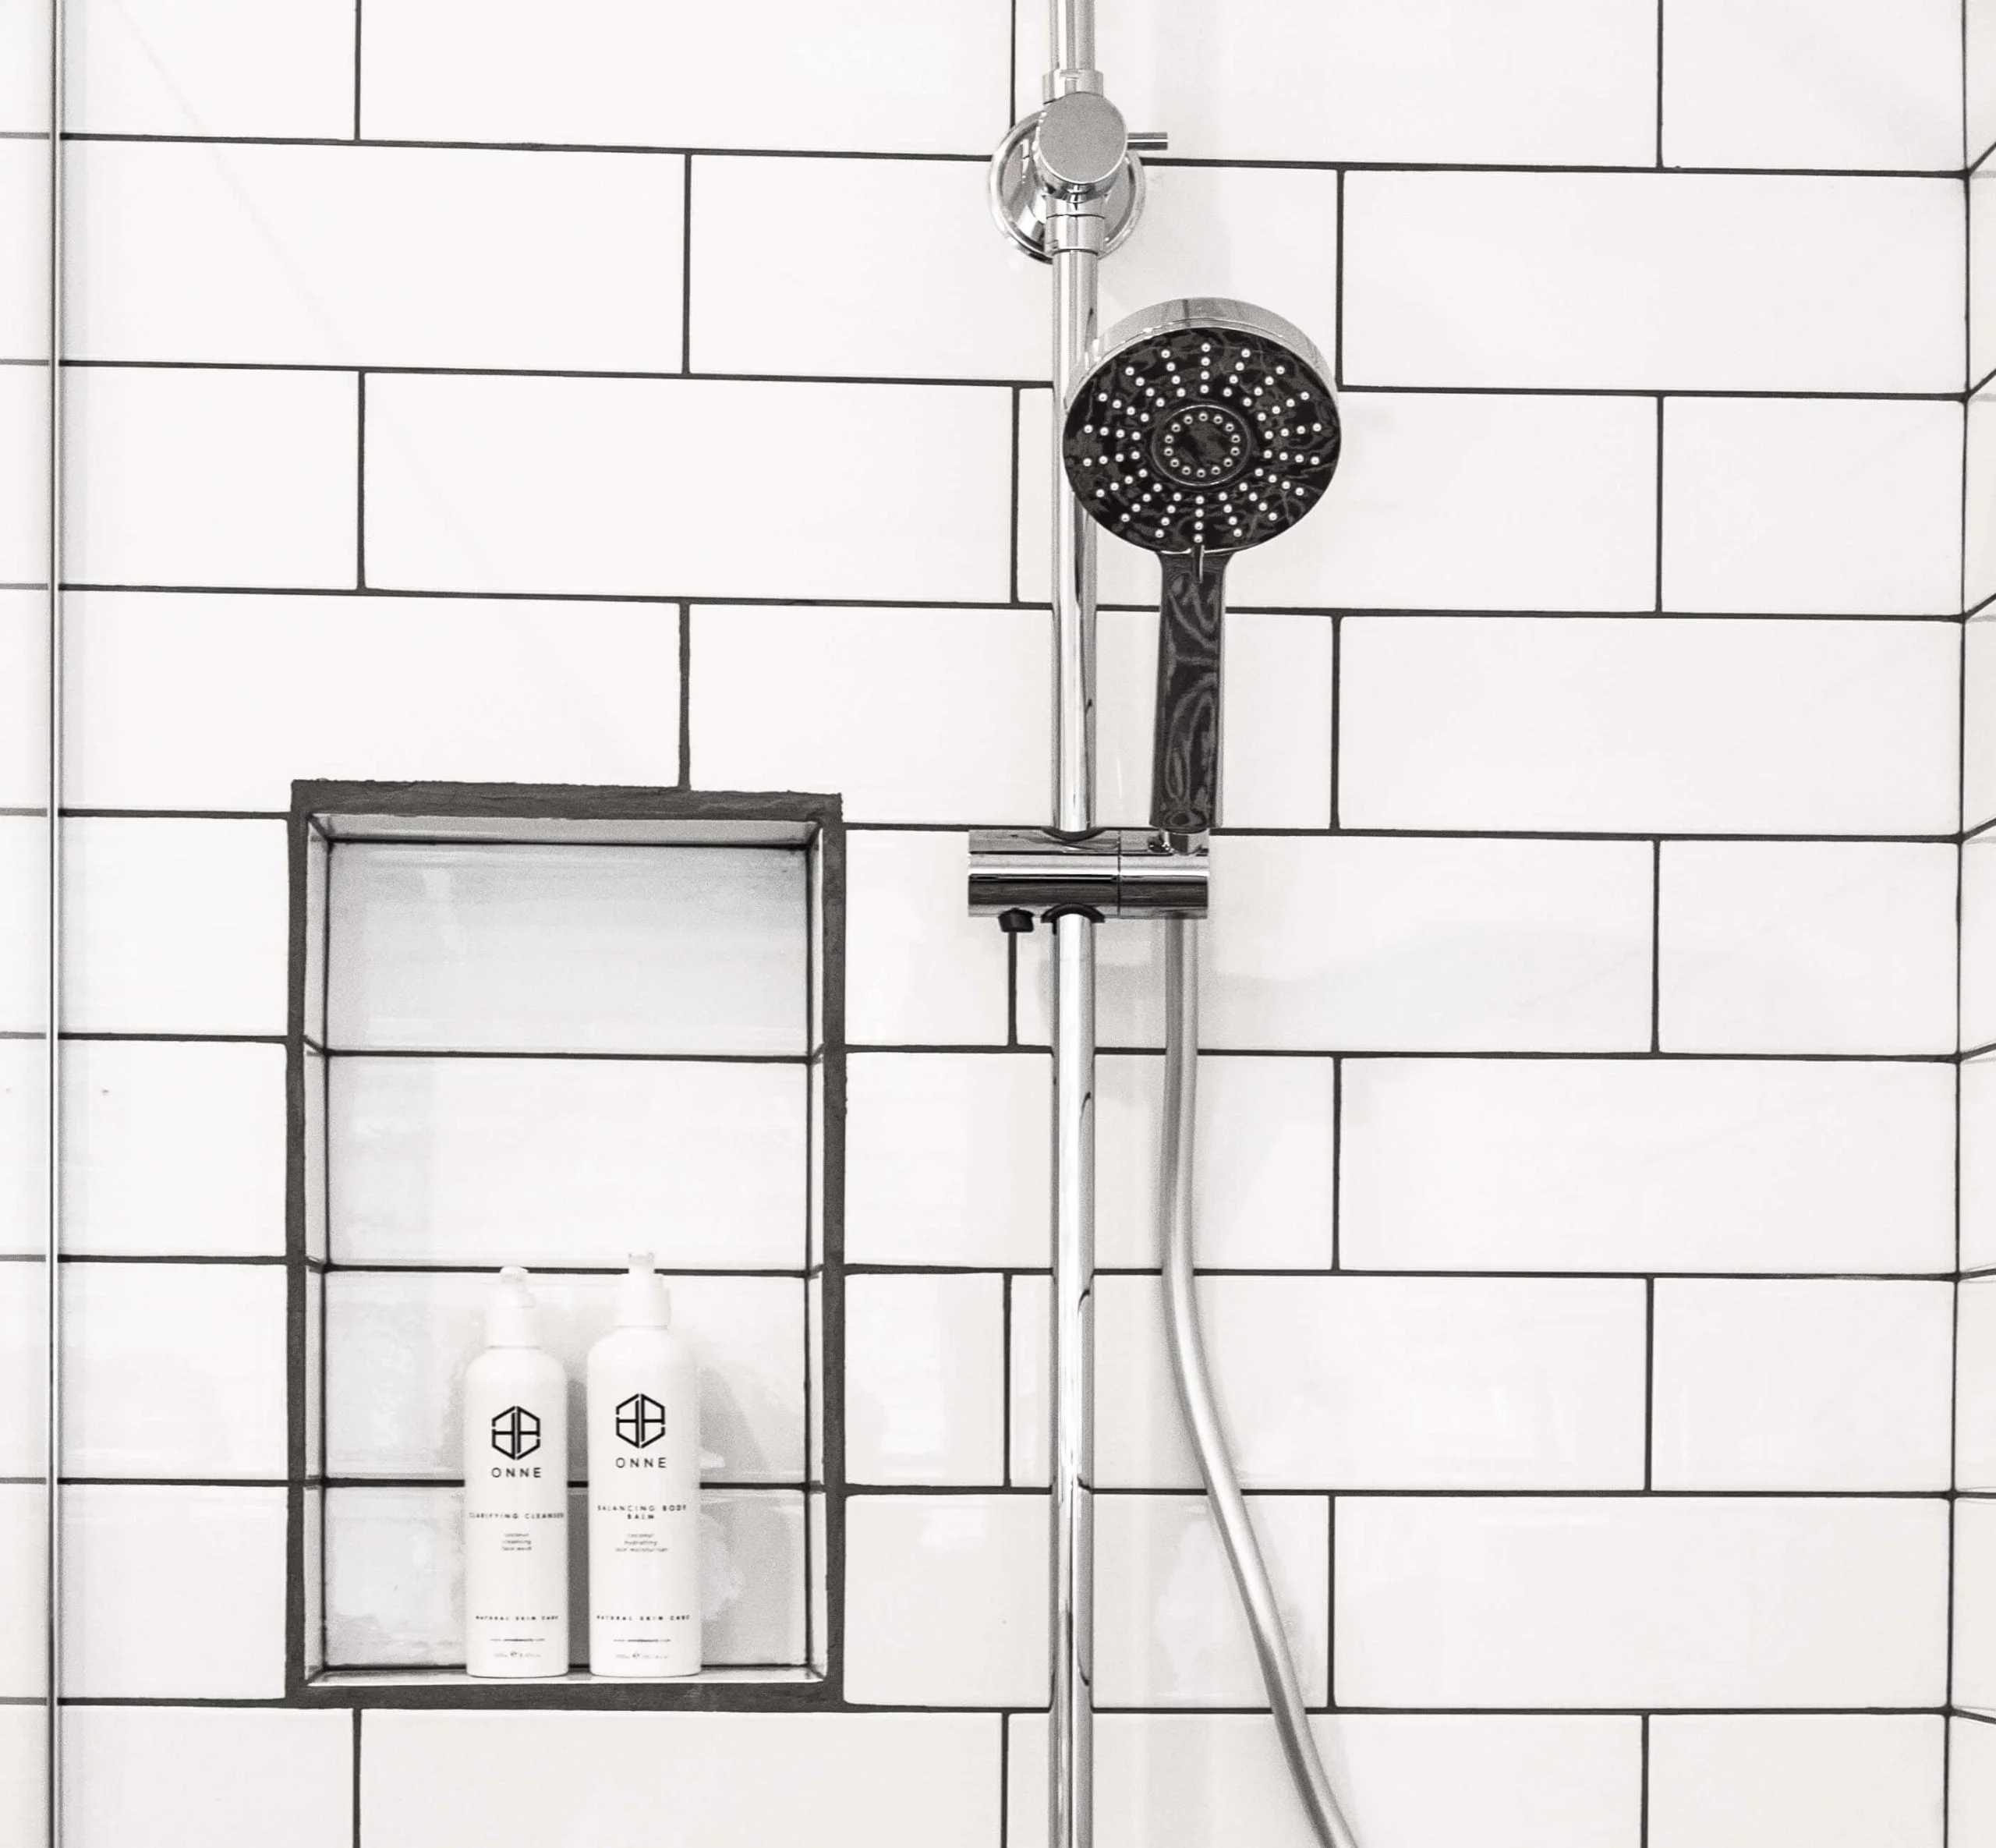 new shower head for rental property